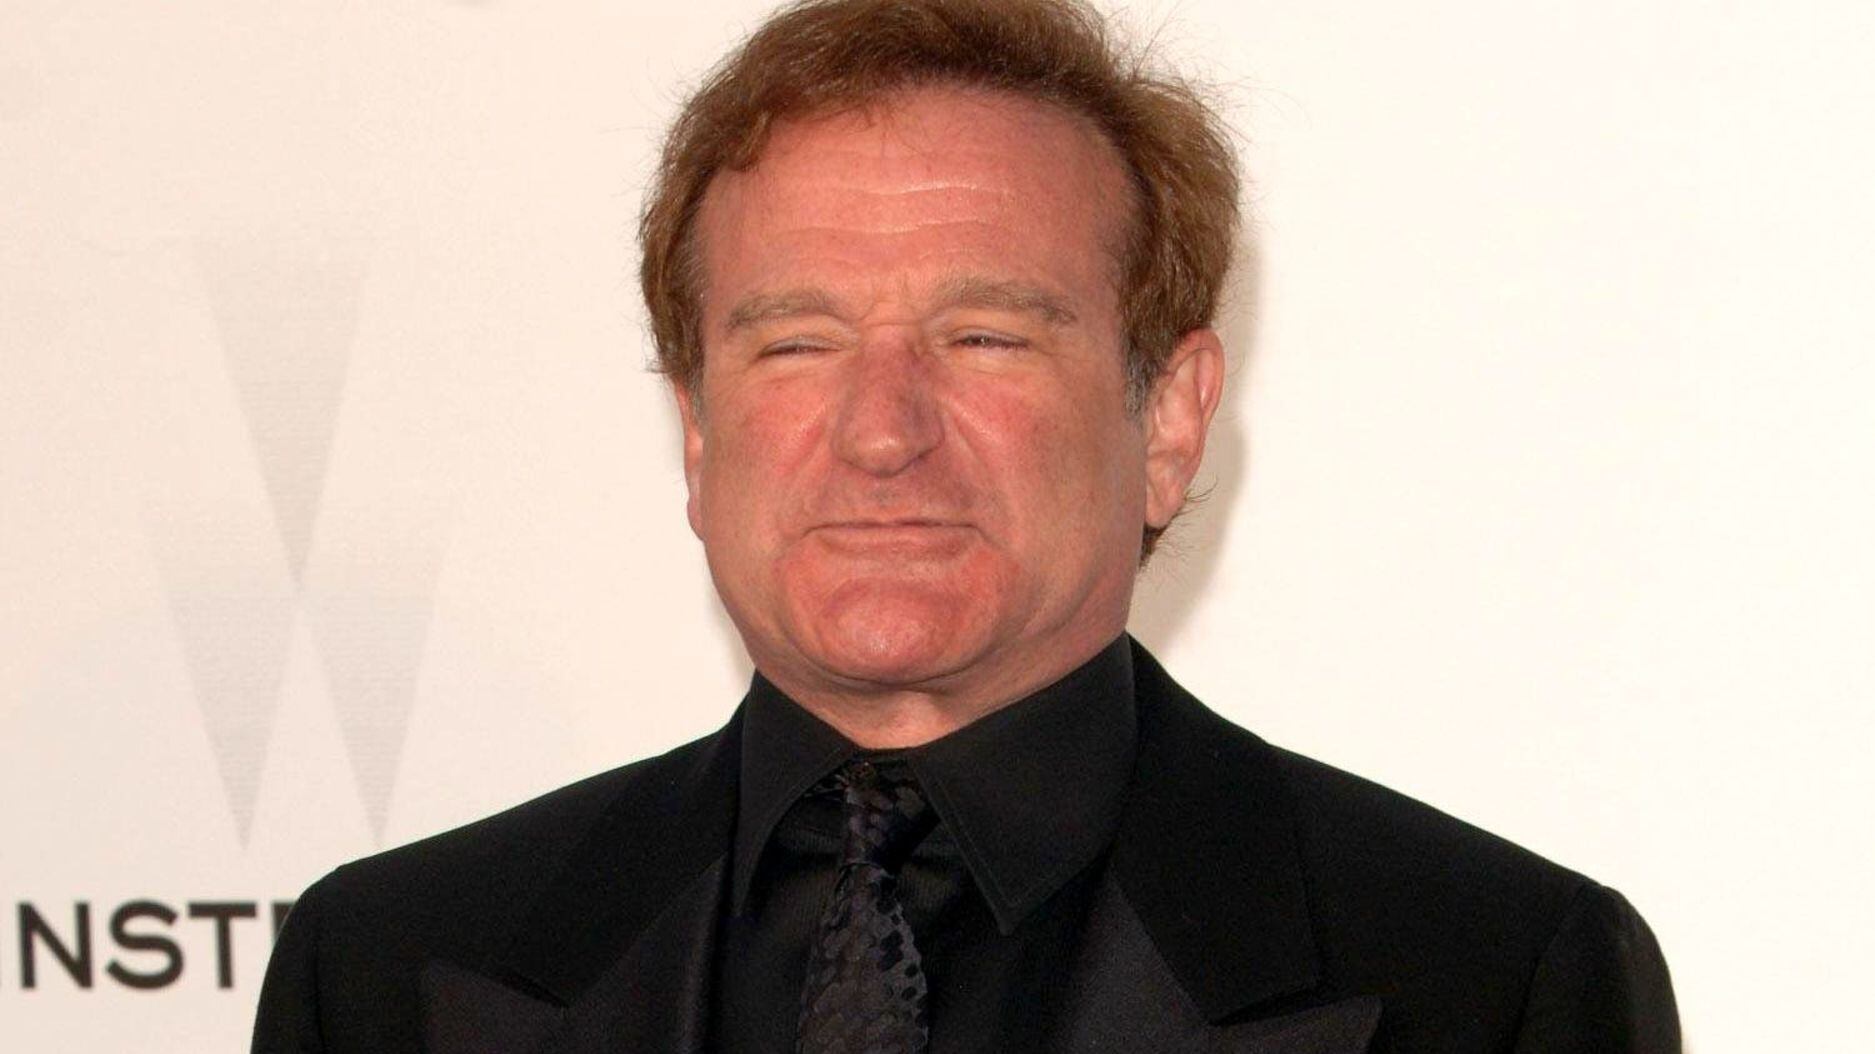 Chris Columbus said he had so much footage because of Robin Williams’ talent for improvisation.